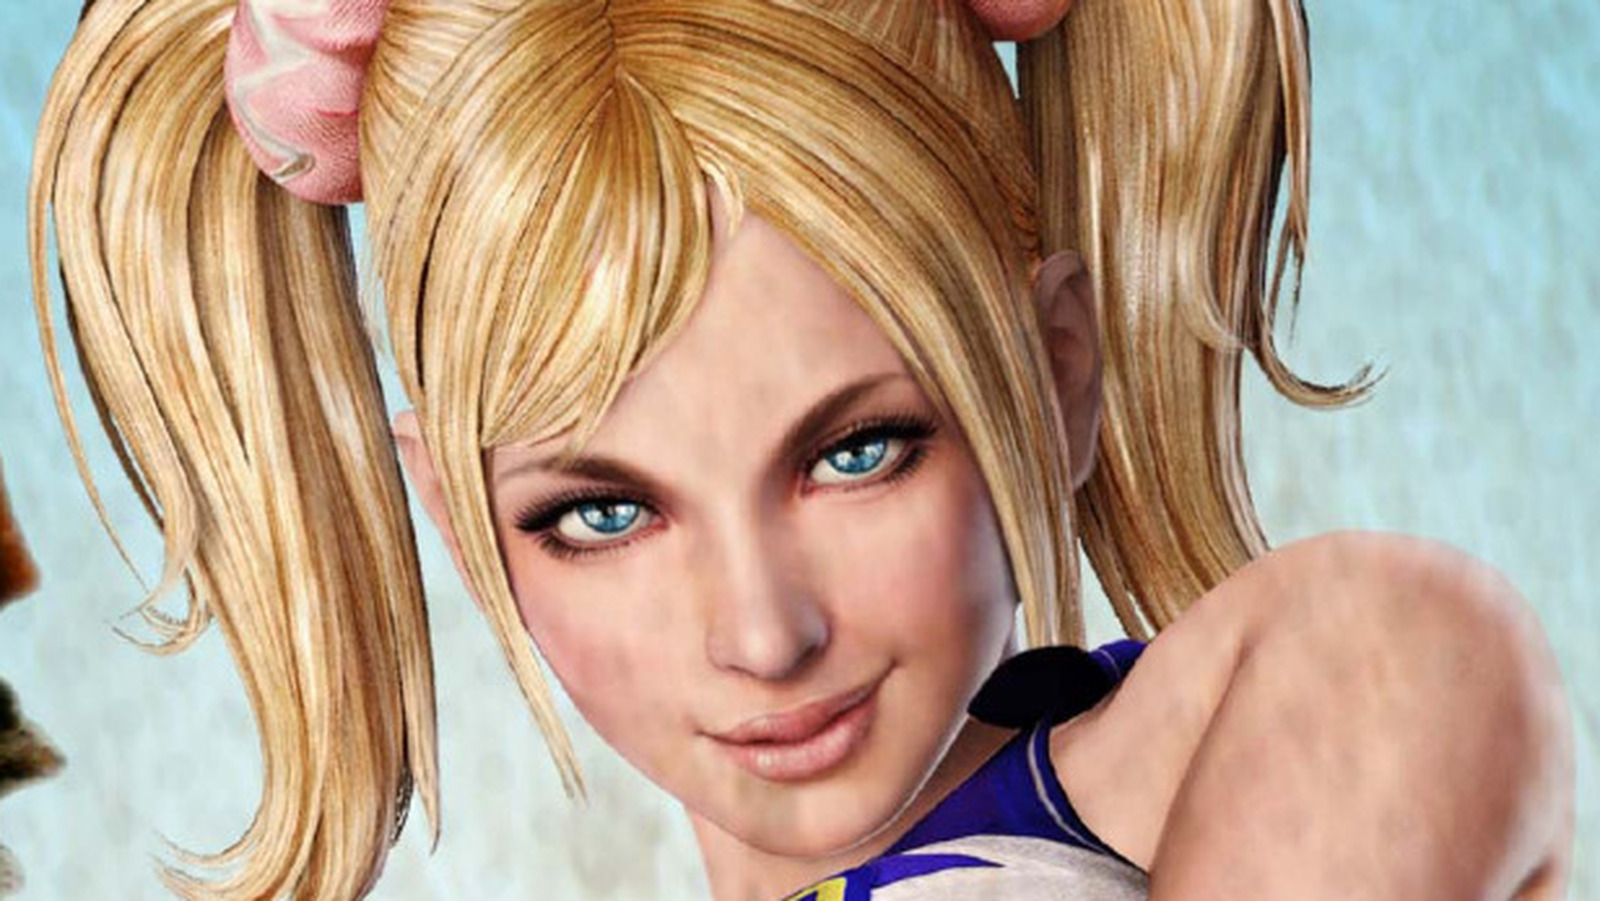 5 things to expect from the upcoming Lollipop Chainsaw remake